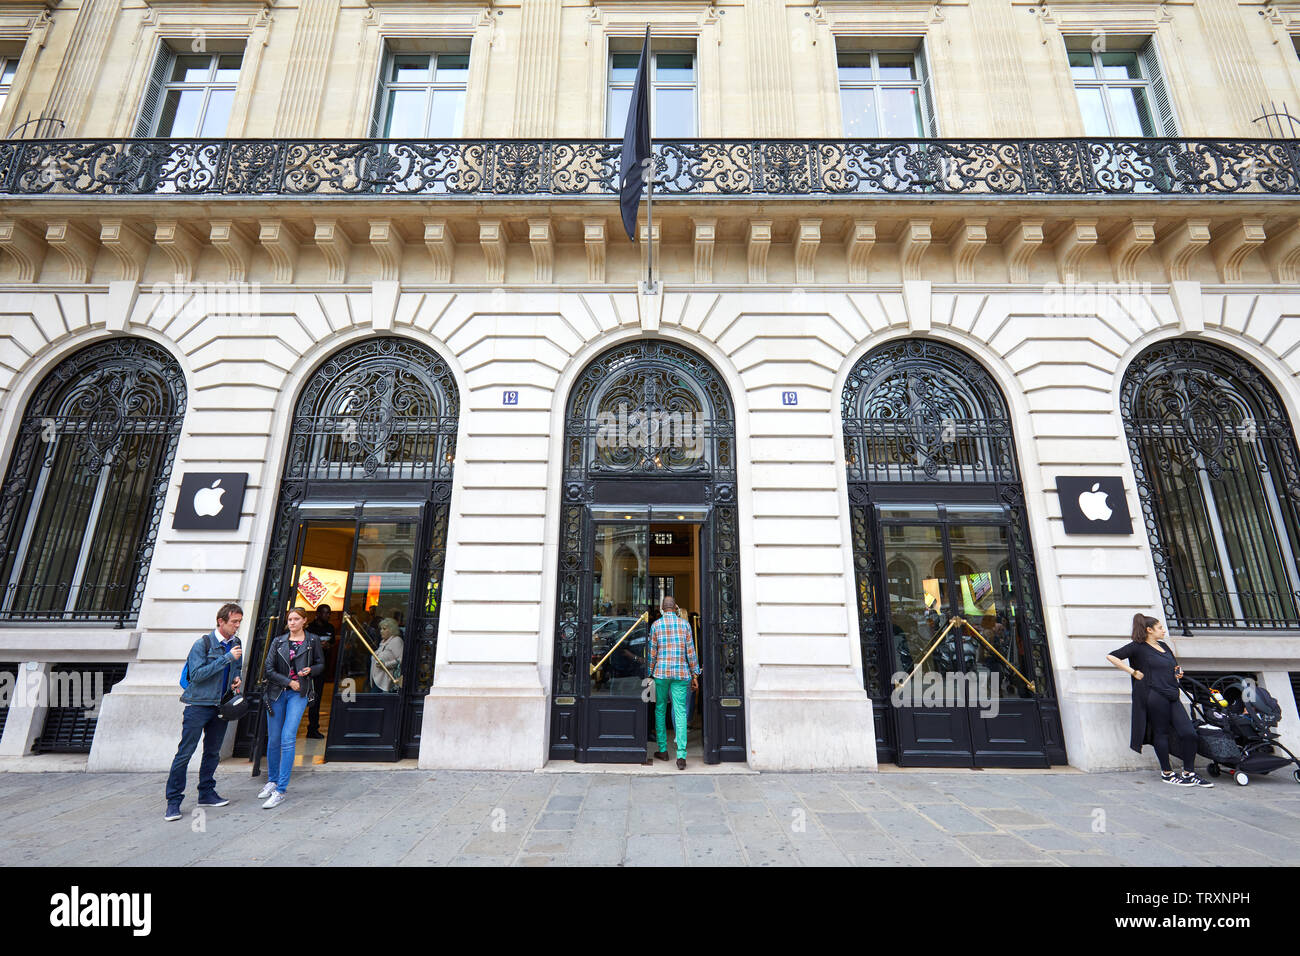 PARIS, FRANCE - JULY 21, 2017: Apple store exterior with people and building facade in Paris, France. Stock Photo